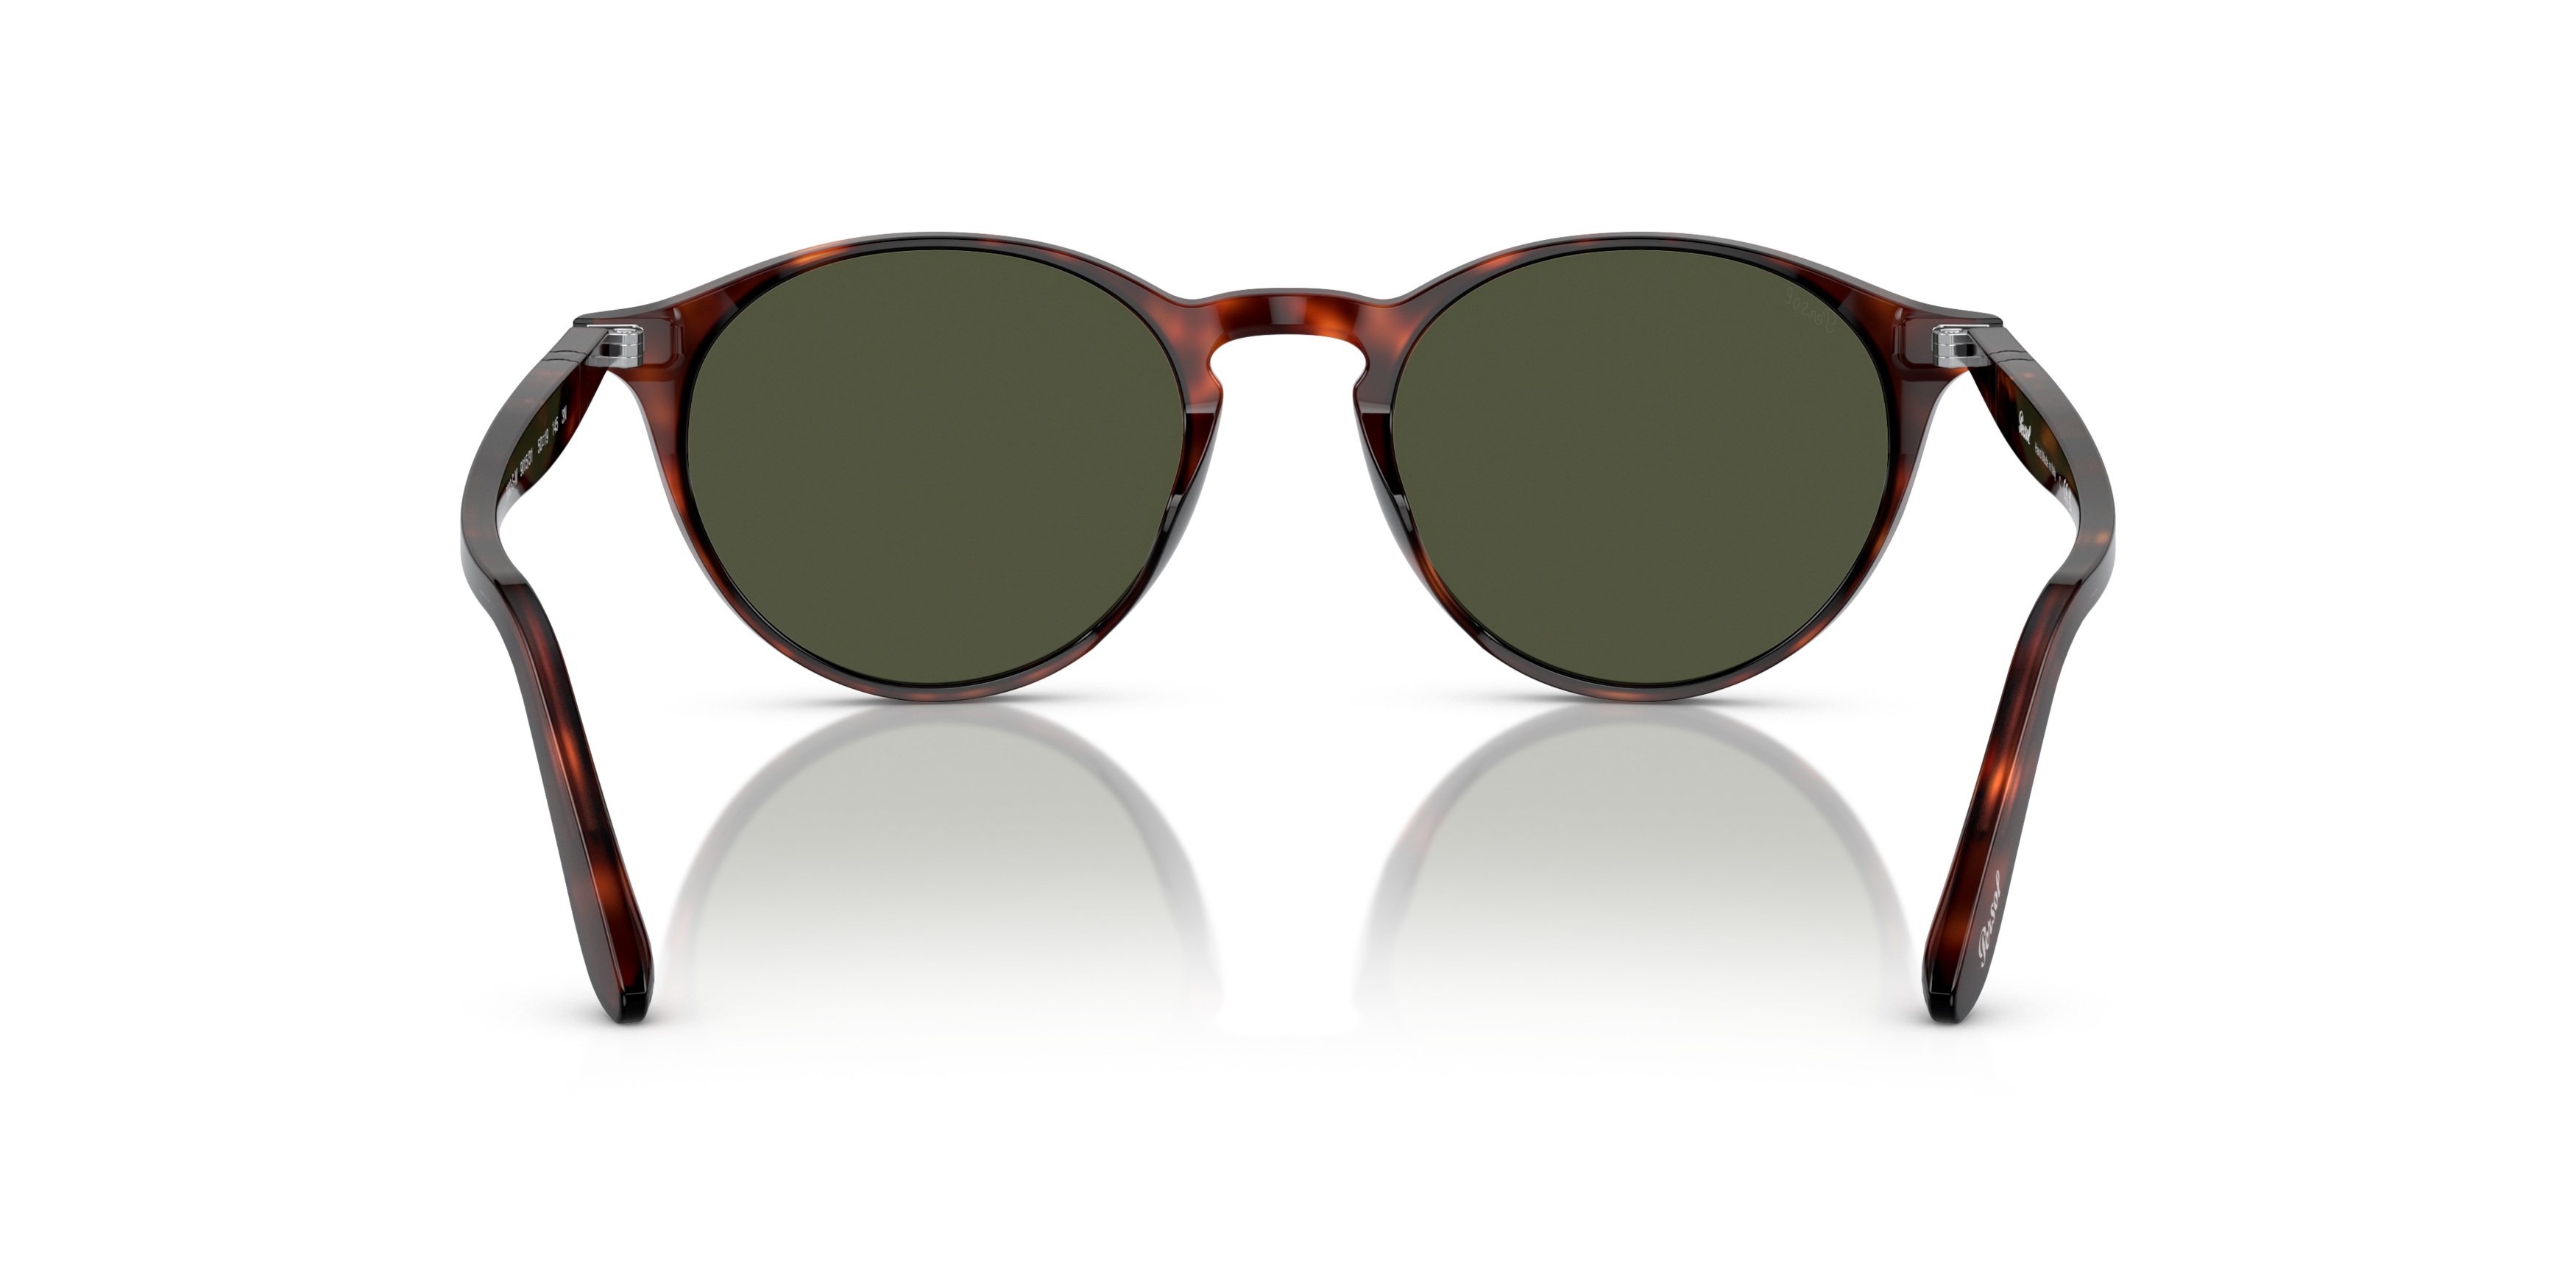 [products.image.detail02] Persol 0PO3092SM 901531